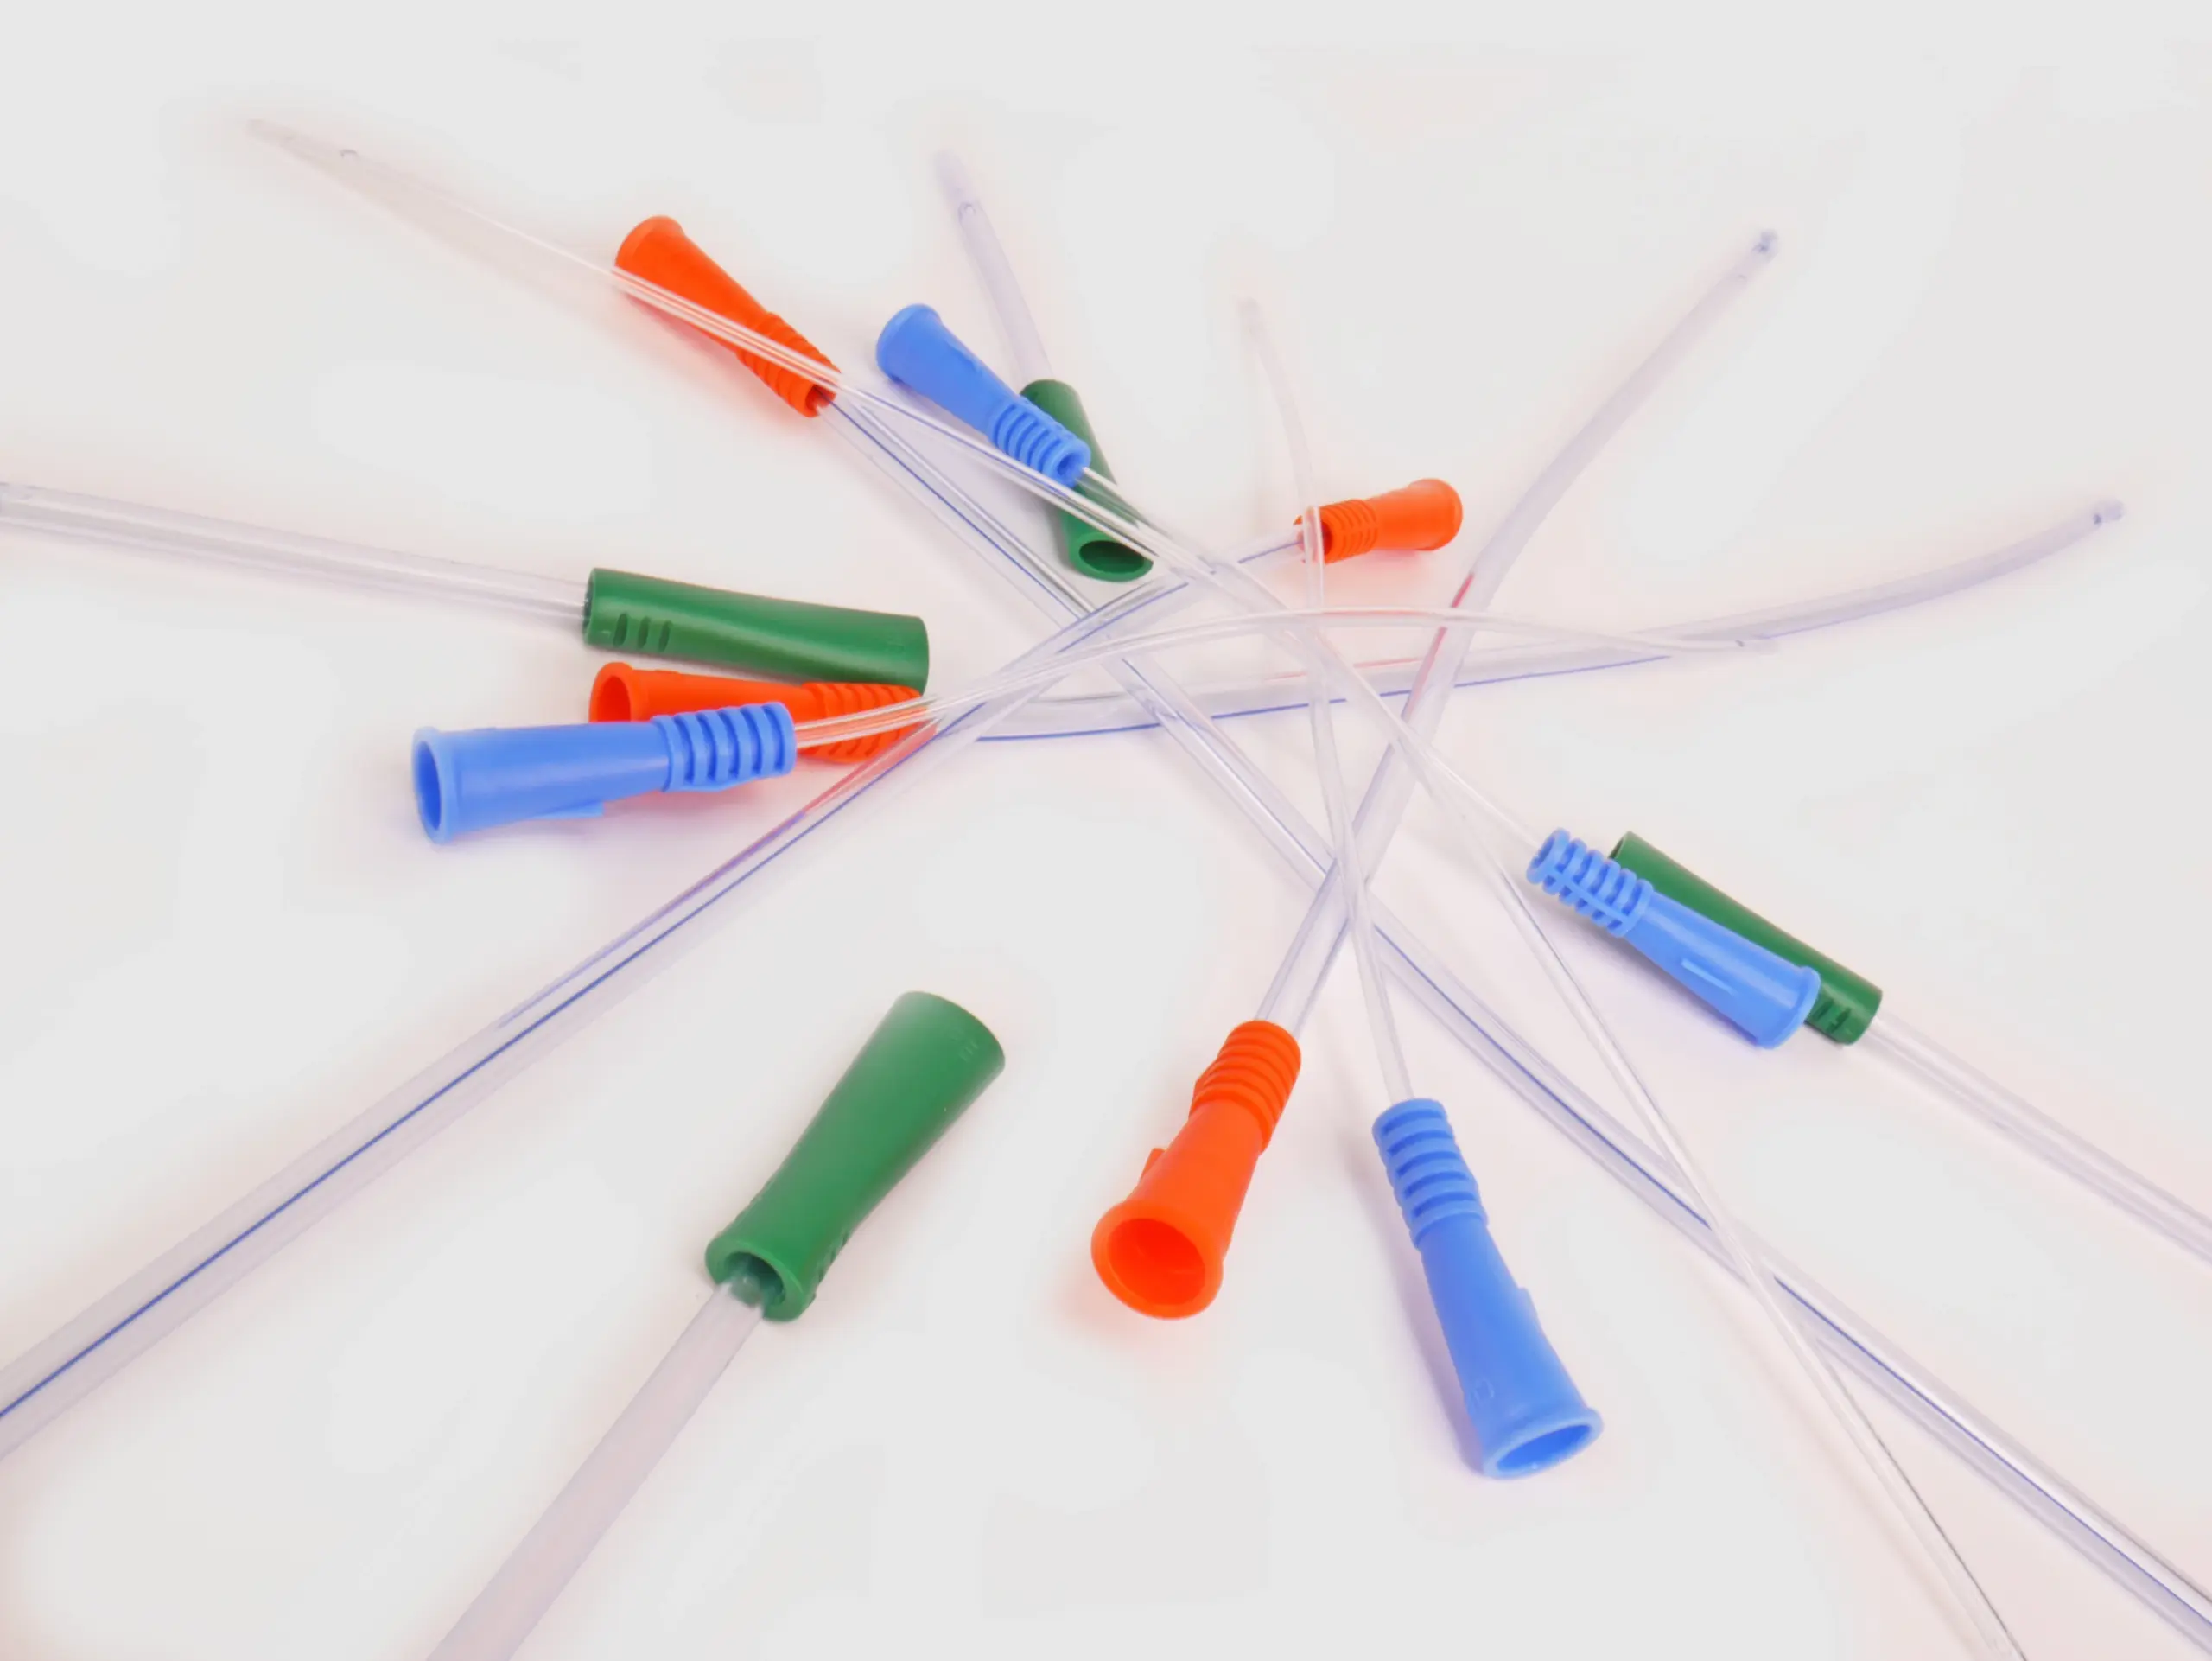 Photograph of an assortment of around twelve RA Fischer Co. catheters of deferring lengths and gripper sleeve colors. Colors are blue green orange. White background